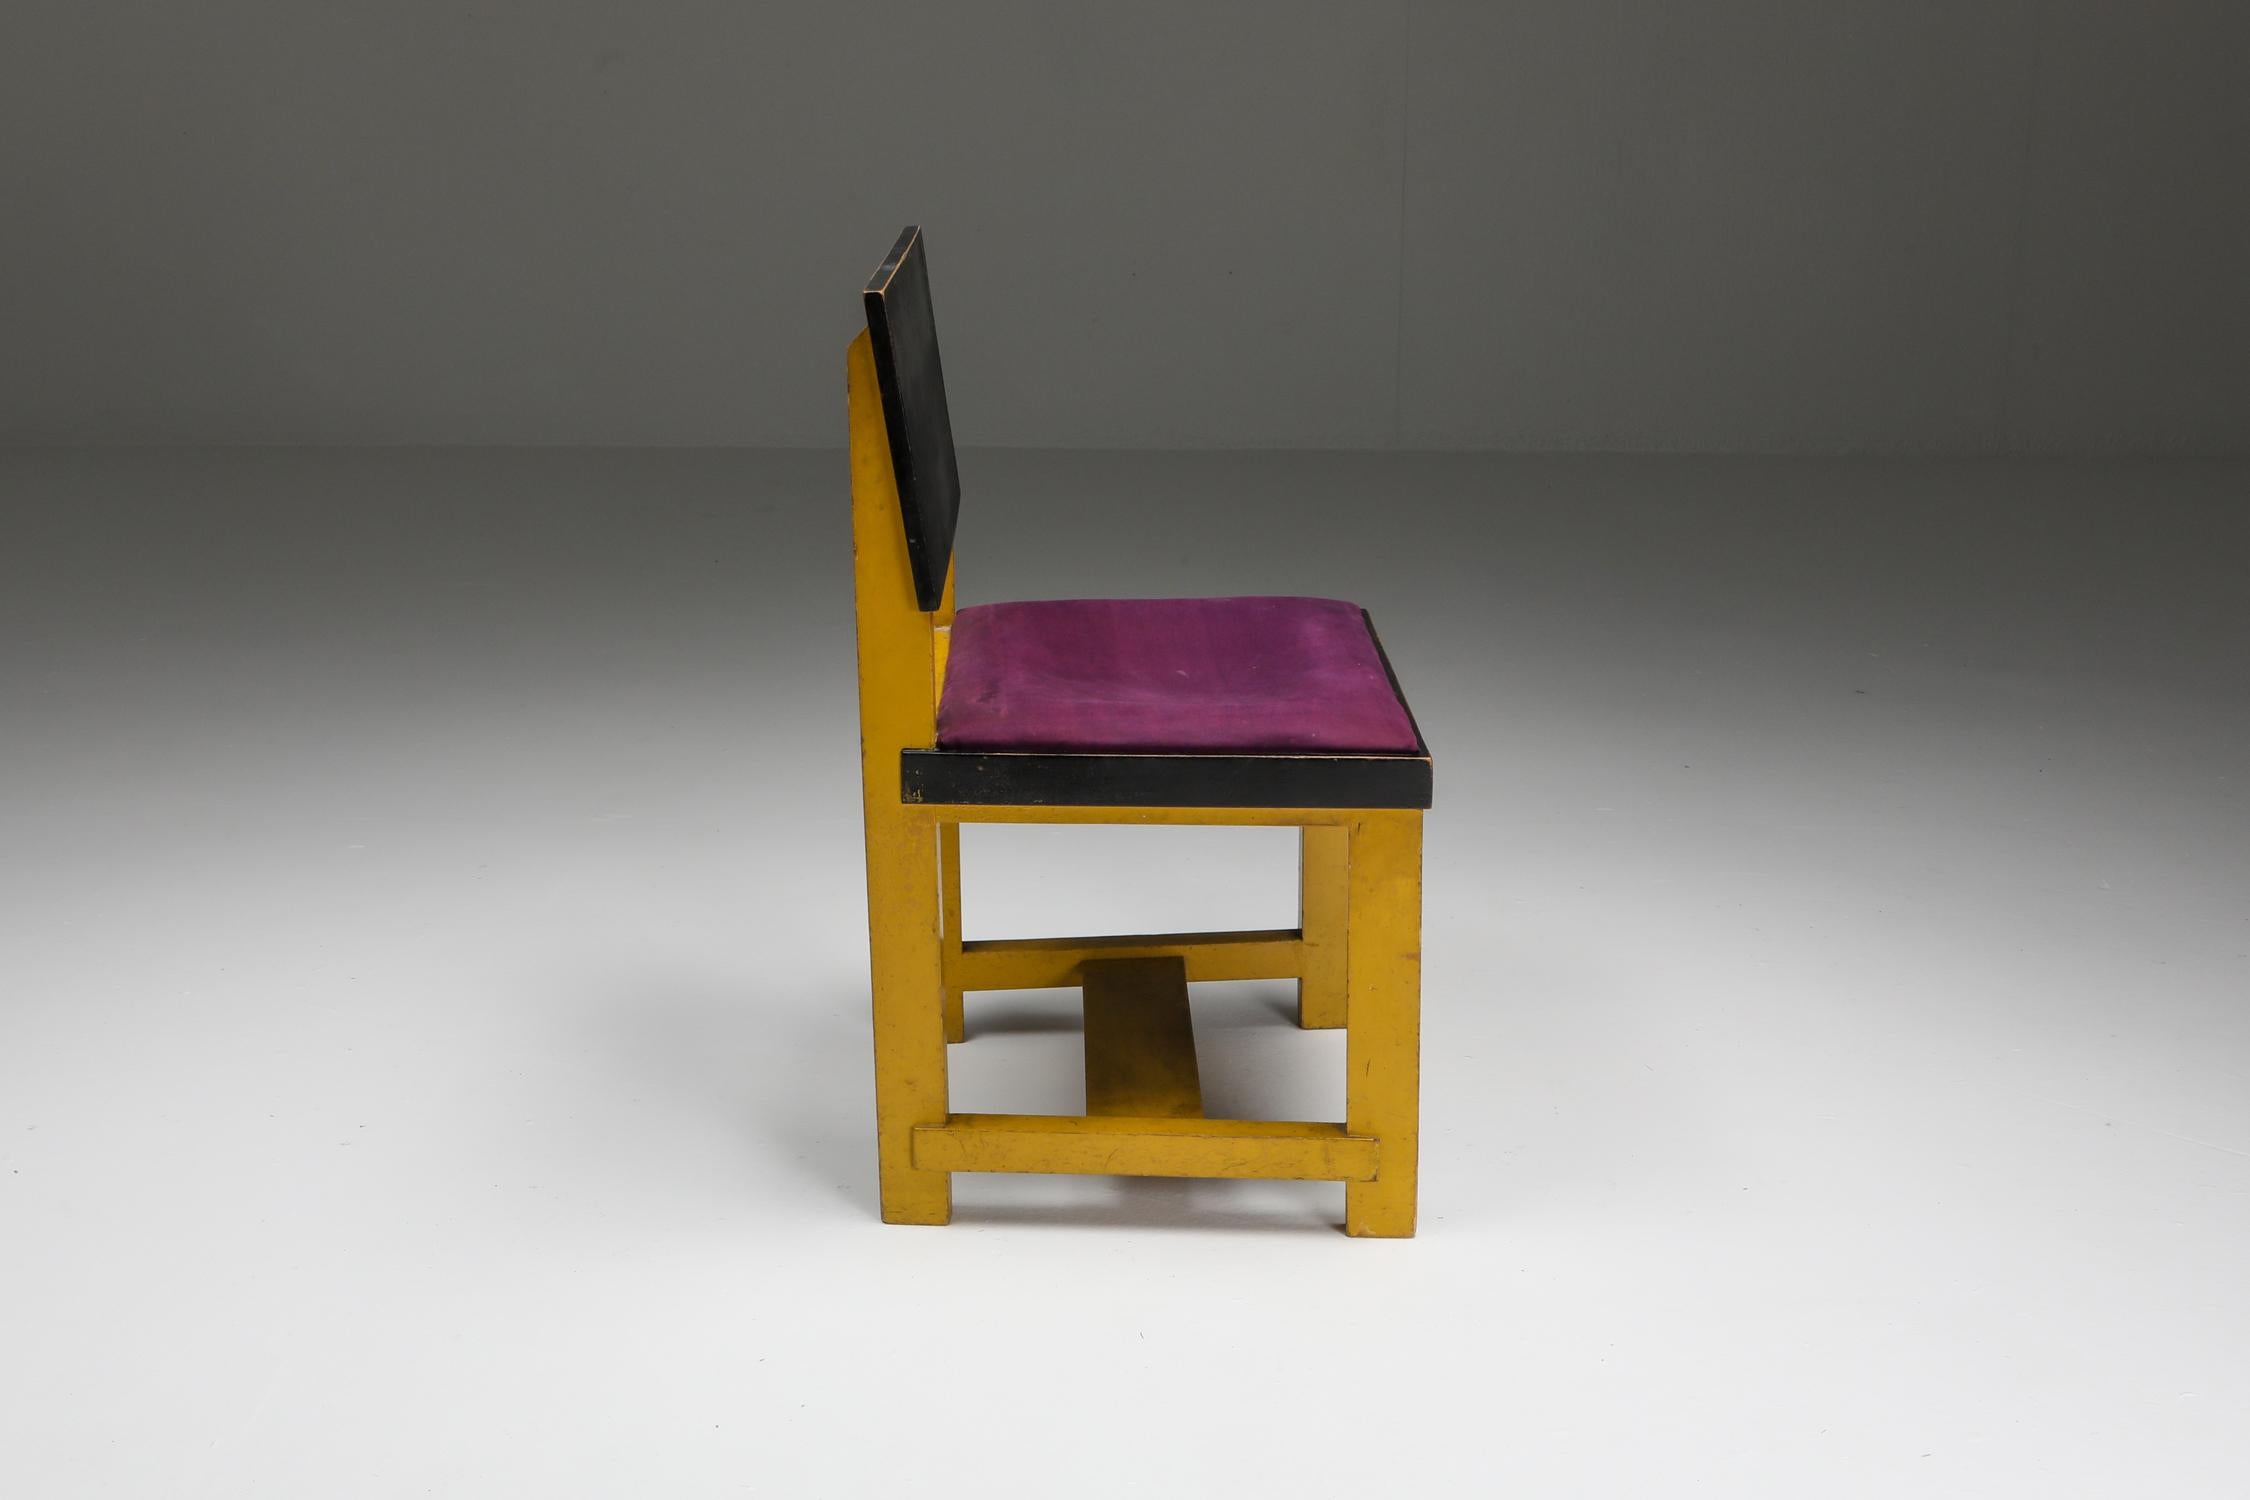 Early 20th Century Yellow Chair by Dutch Modernist H.Wouda, 1924